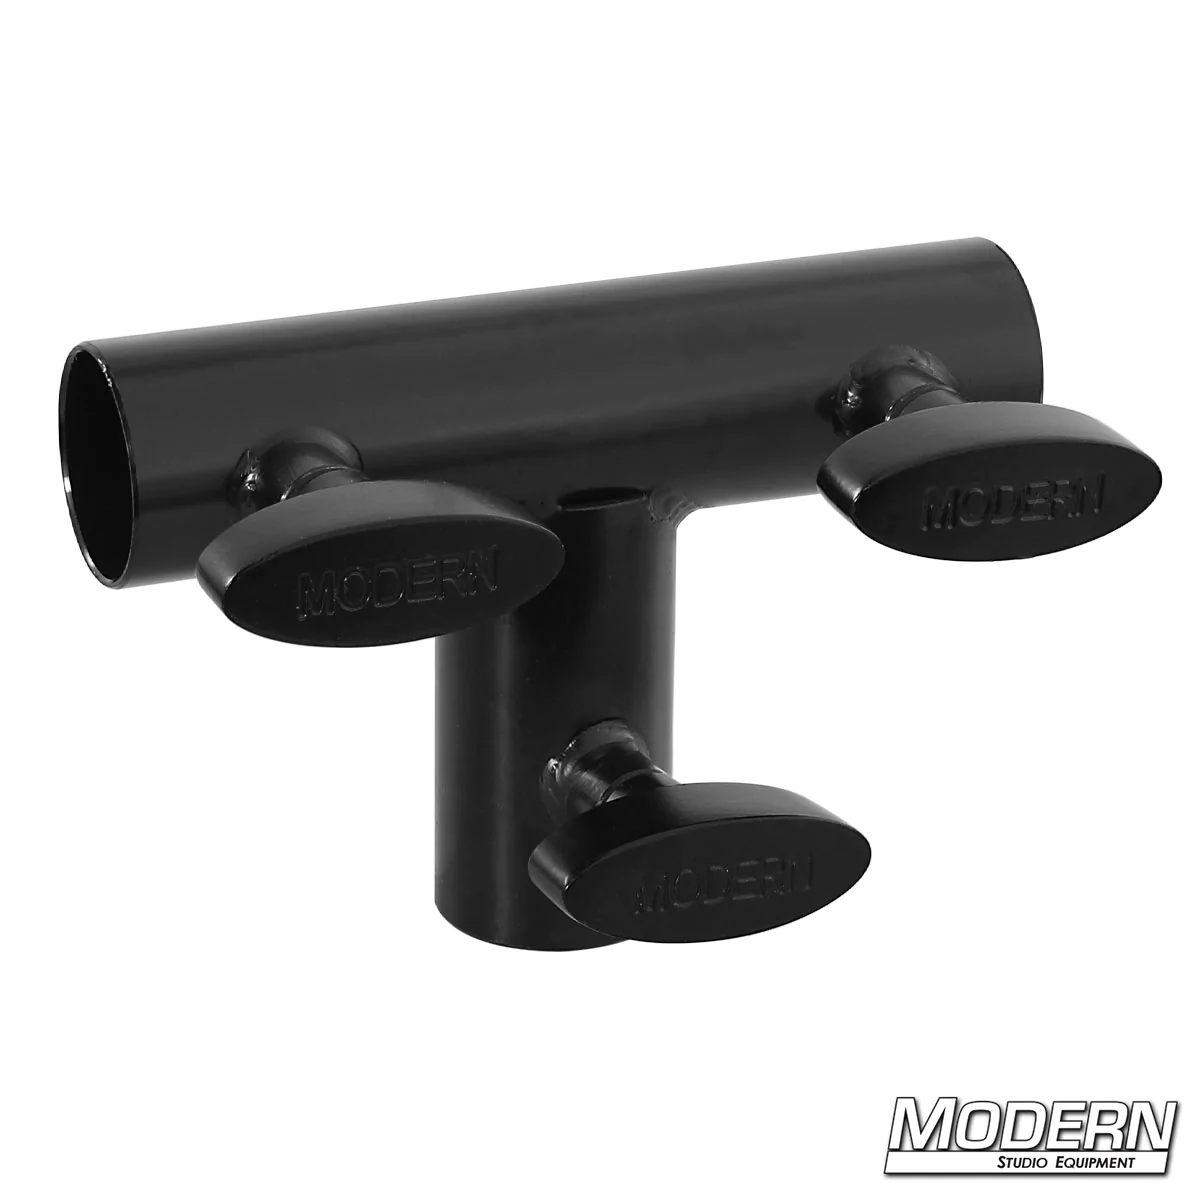 Tee for 1-inch Round Pipe - Black Zinc with T-Handles